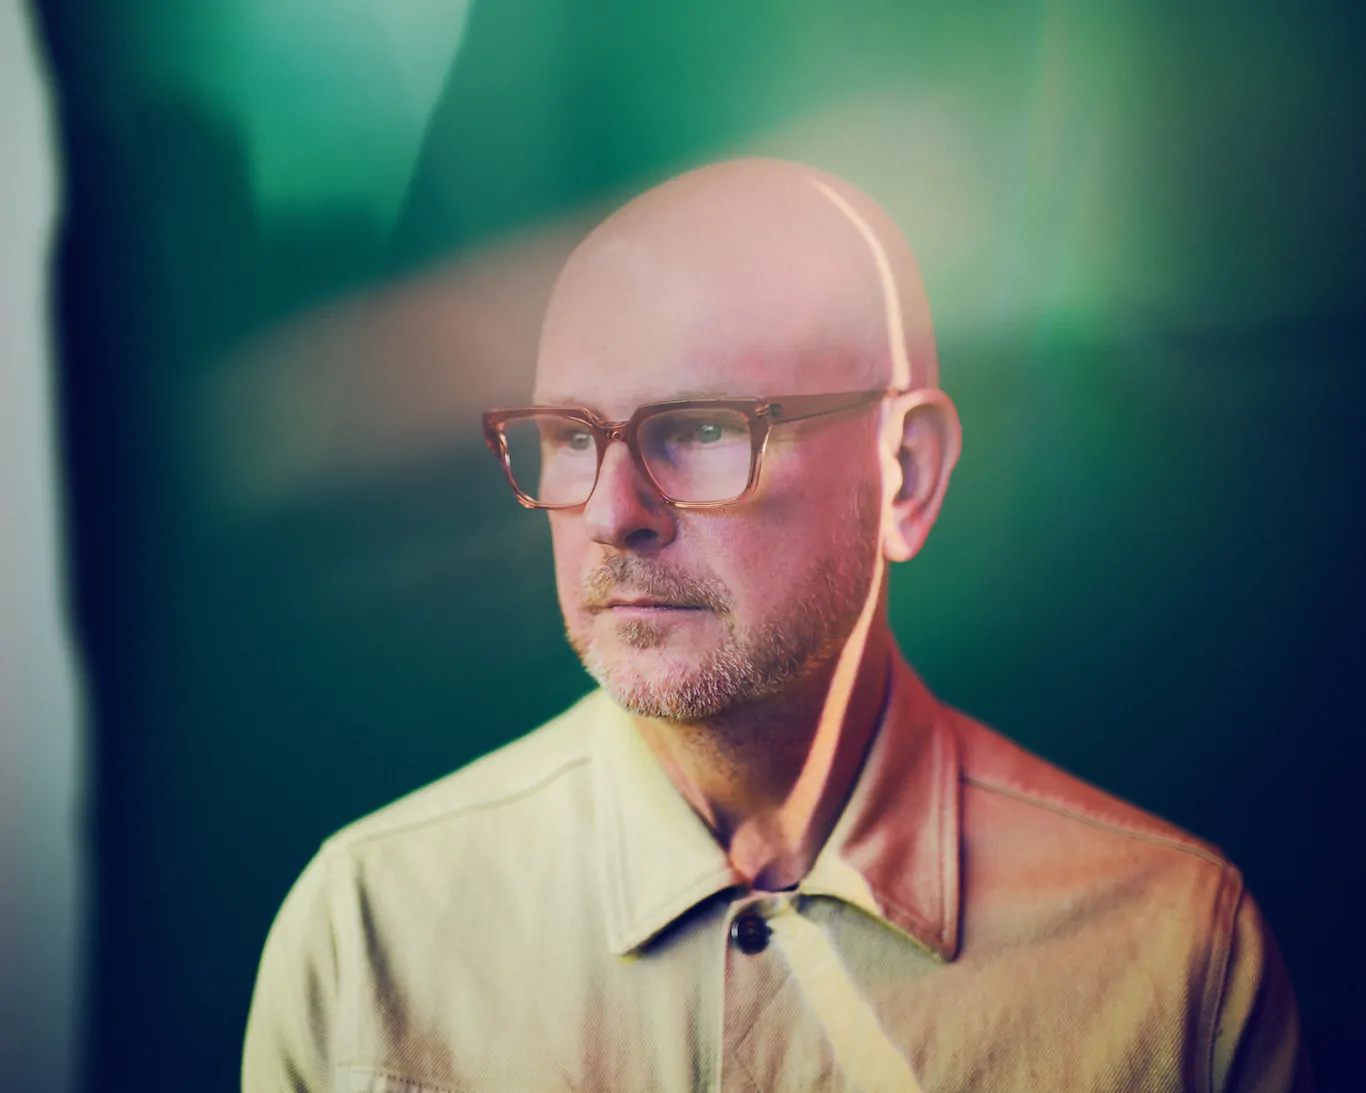 PHILIP SELWAY shares video for new single ‘Picking Up Pieces’ from upcoming album ‘Strange Dance’